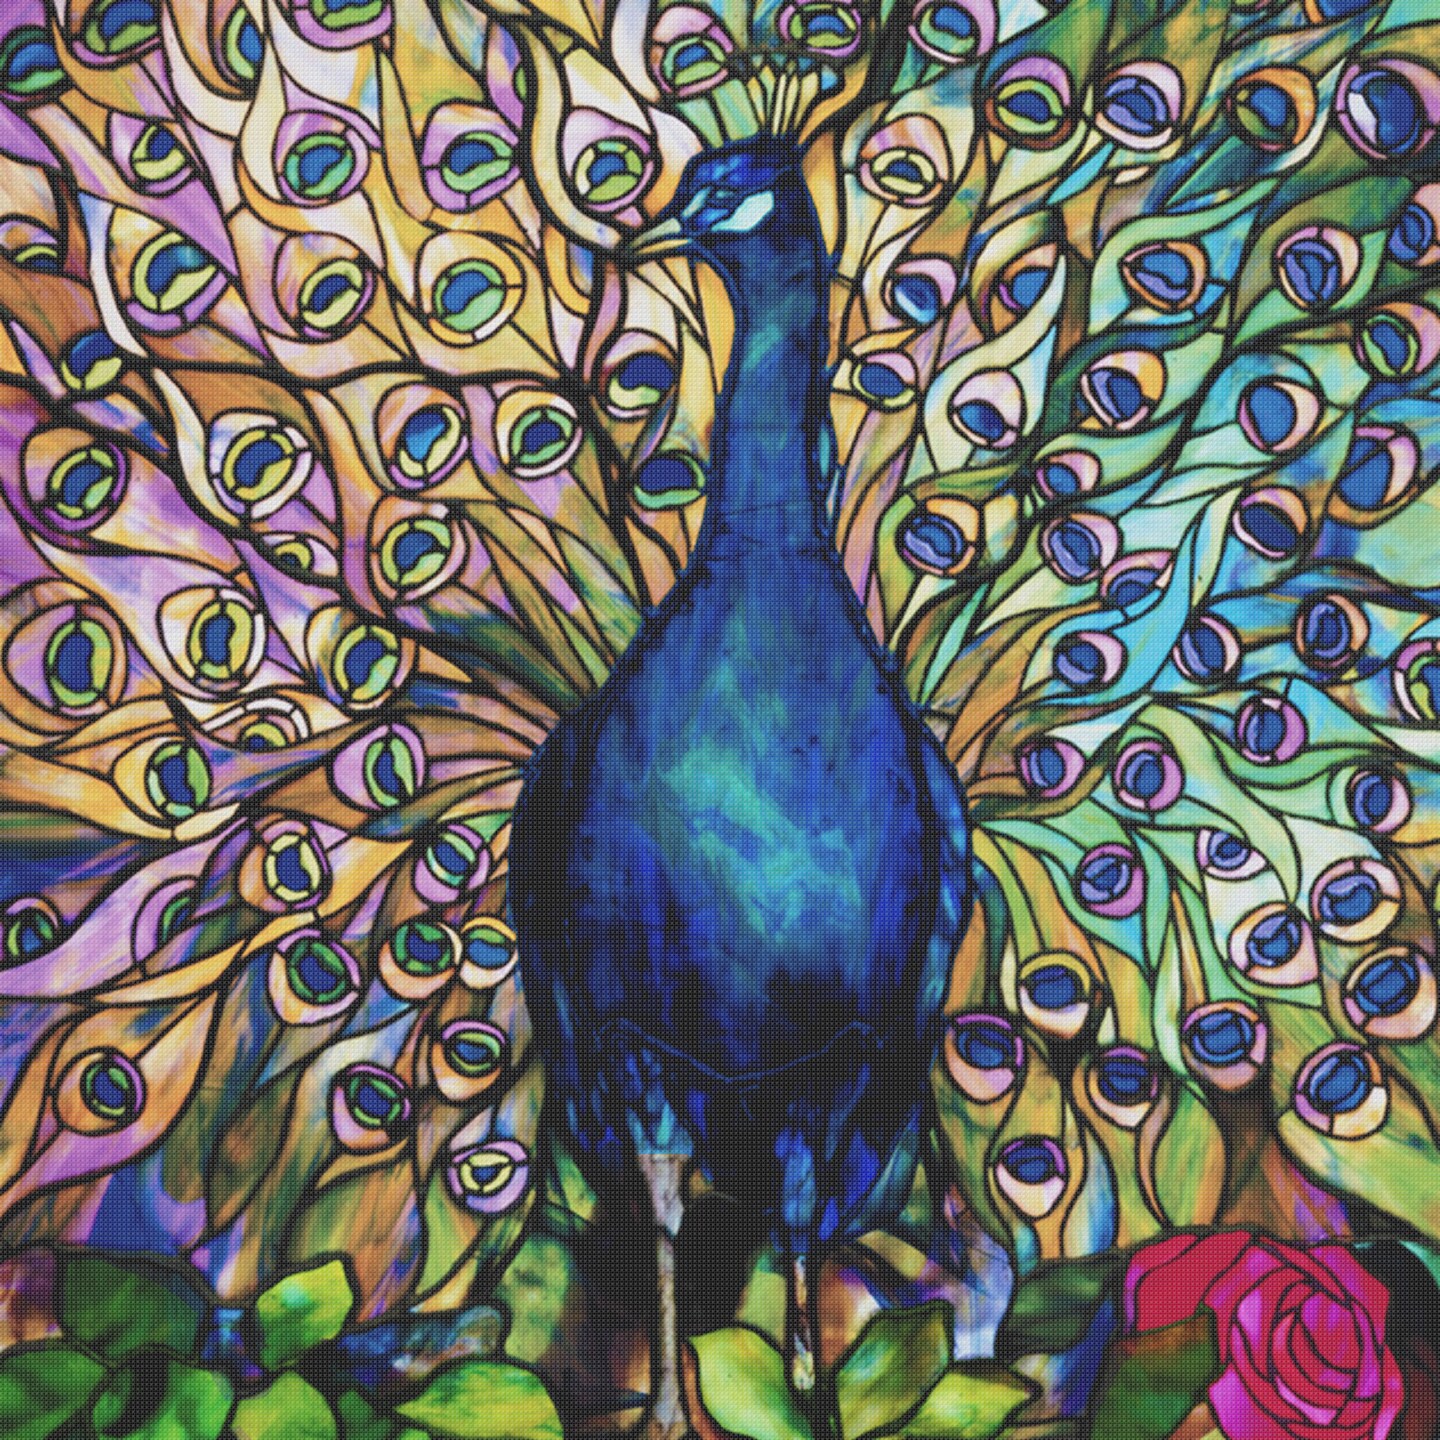 A Peacocks Glory inspired by Louis Comfort Tiffany Counted Cross